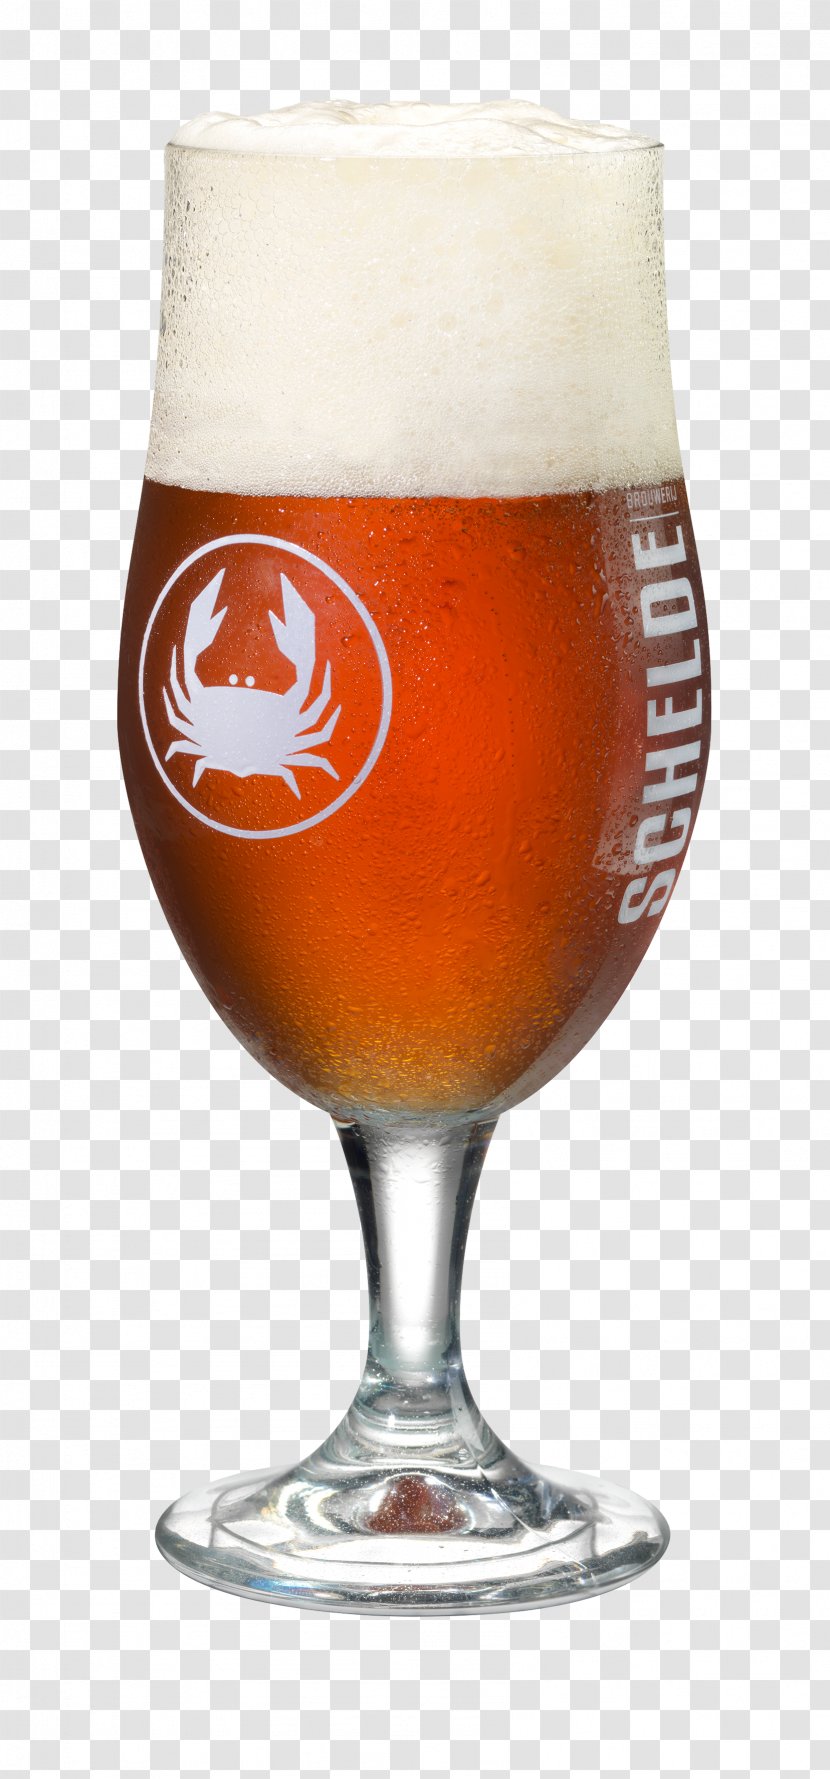 Beer Glasses Scotch Ale Lager - Pint Glass - Amber Transparent PNG